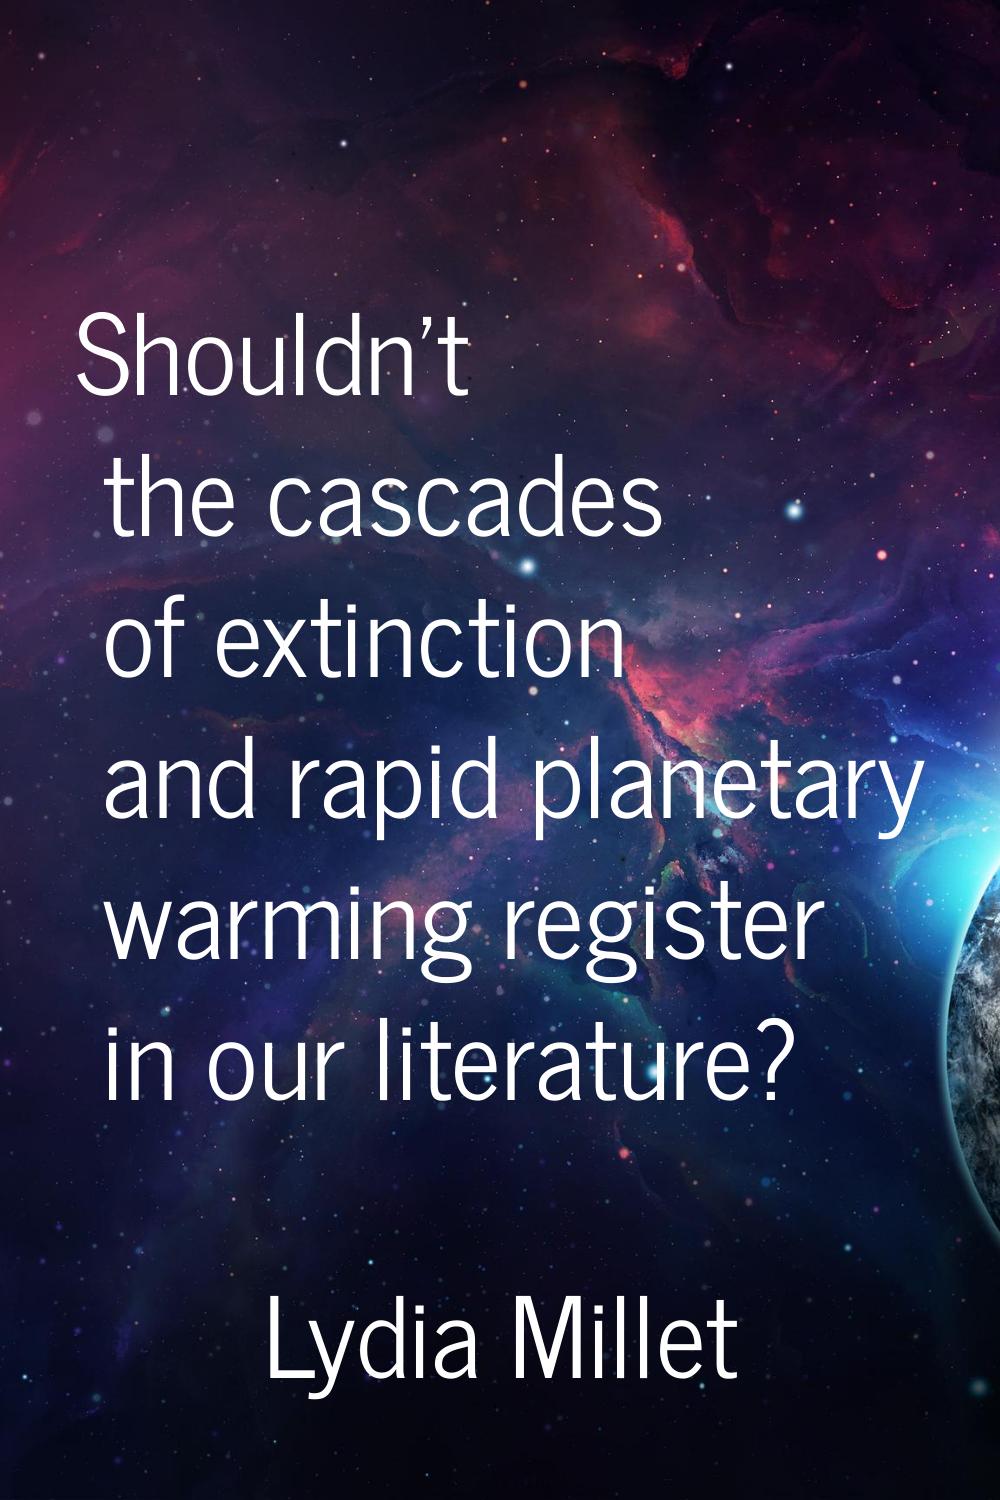 Shouldn't the cascades of extinction and rapid planetary warming register in our literature?